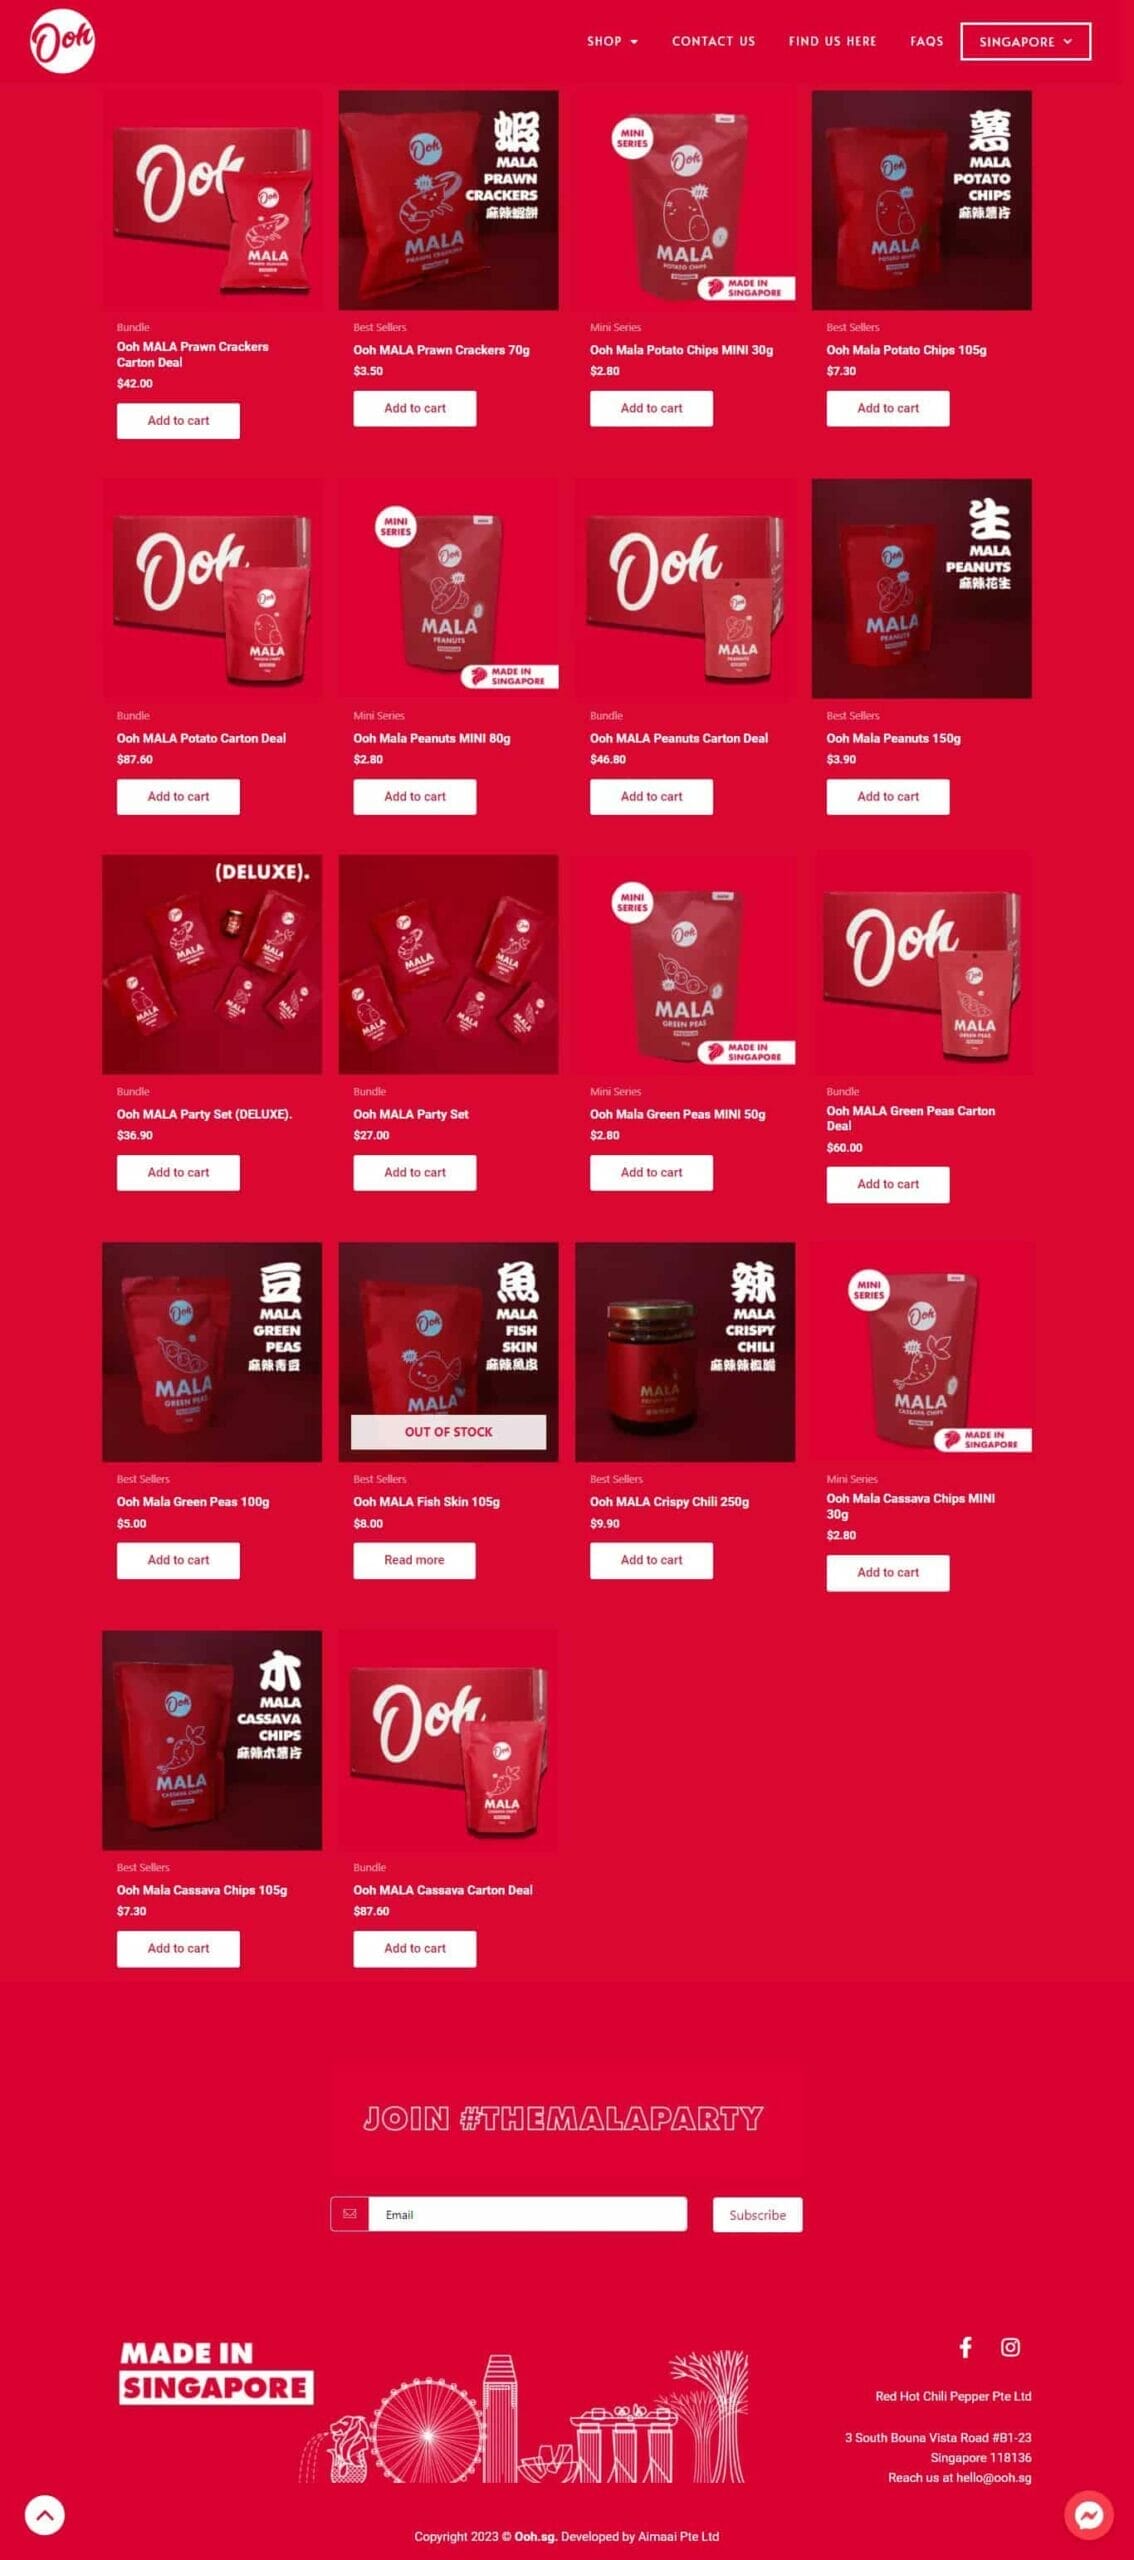 A vibrant red page showcasing a captivating assortment of items, perfect for F&B businesses looking to create an eye-catching web development project using WordPress.